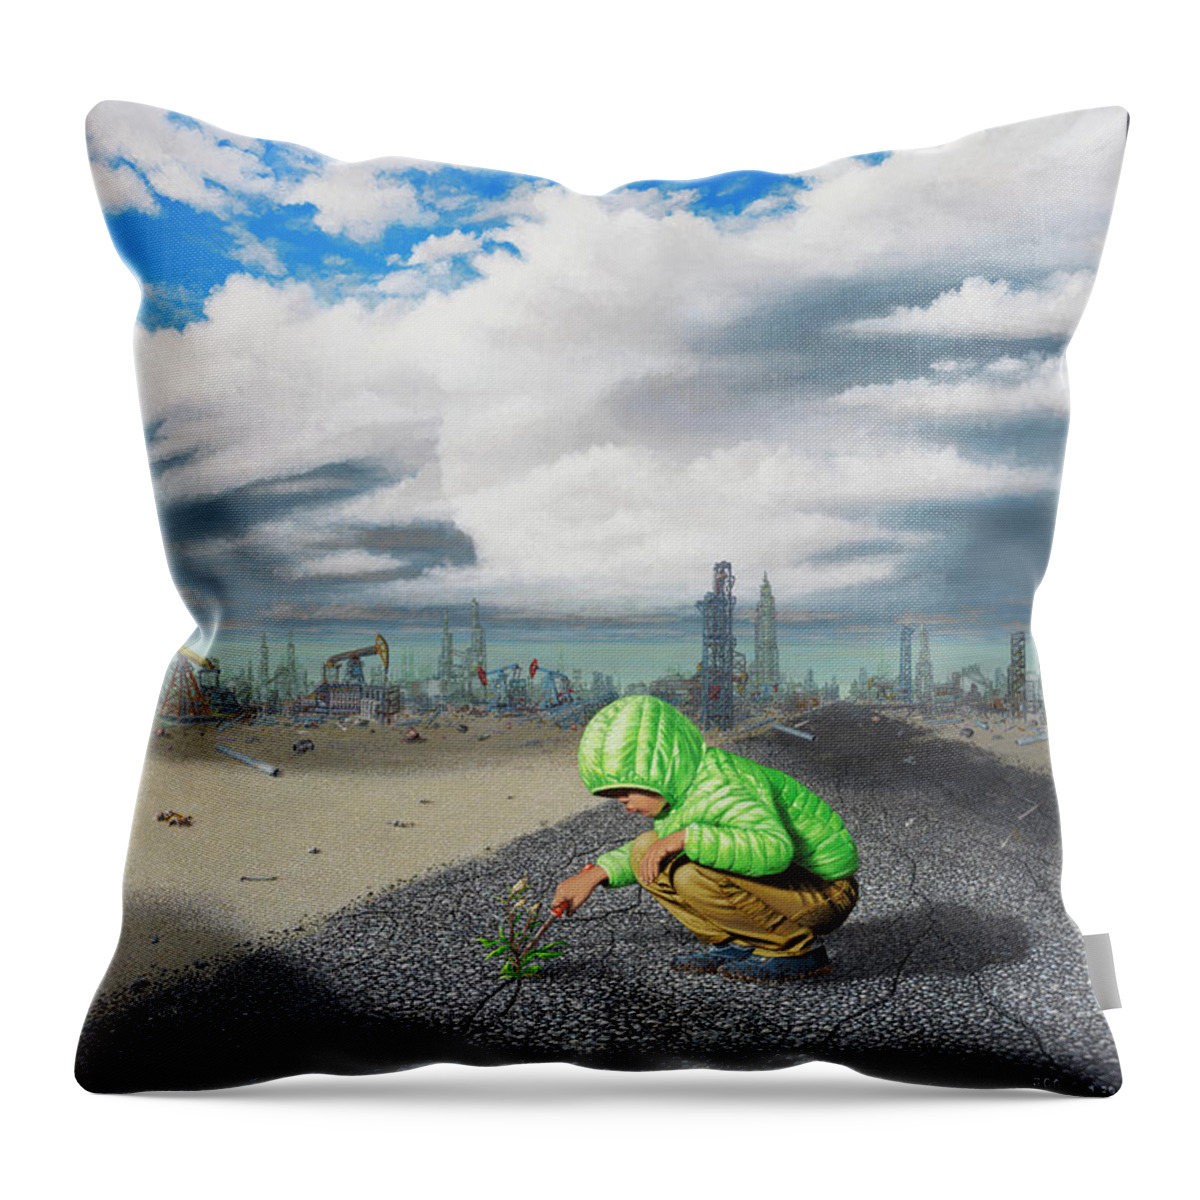 Concept Throw Pillow featuring the painting Revival by Jon Carroll Otterson